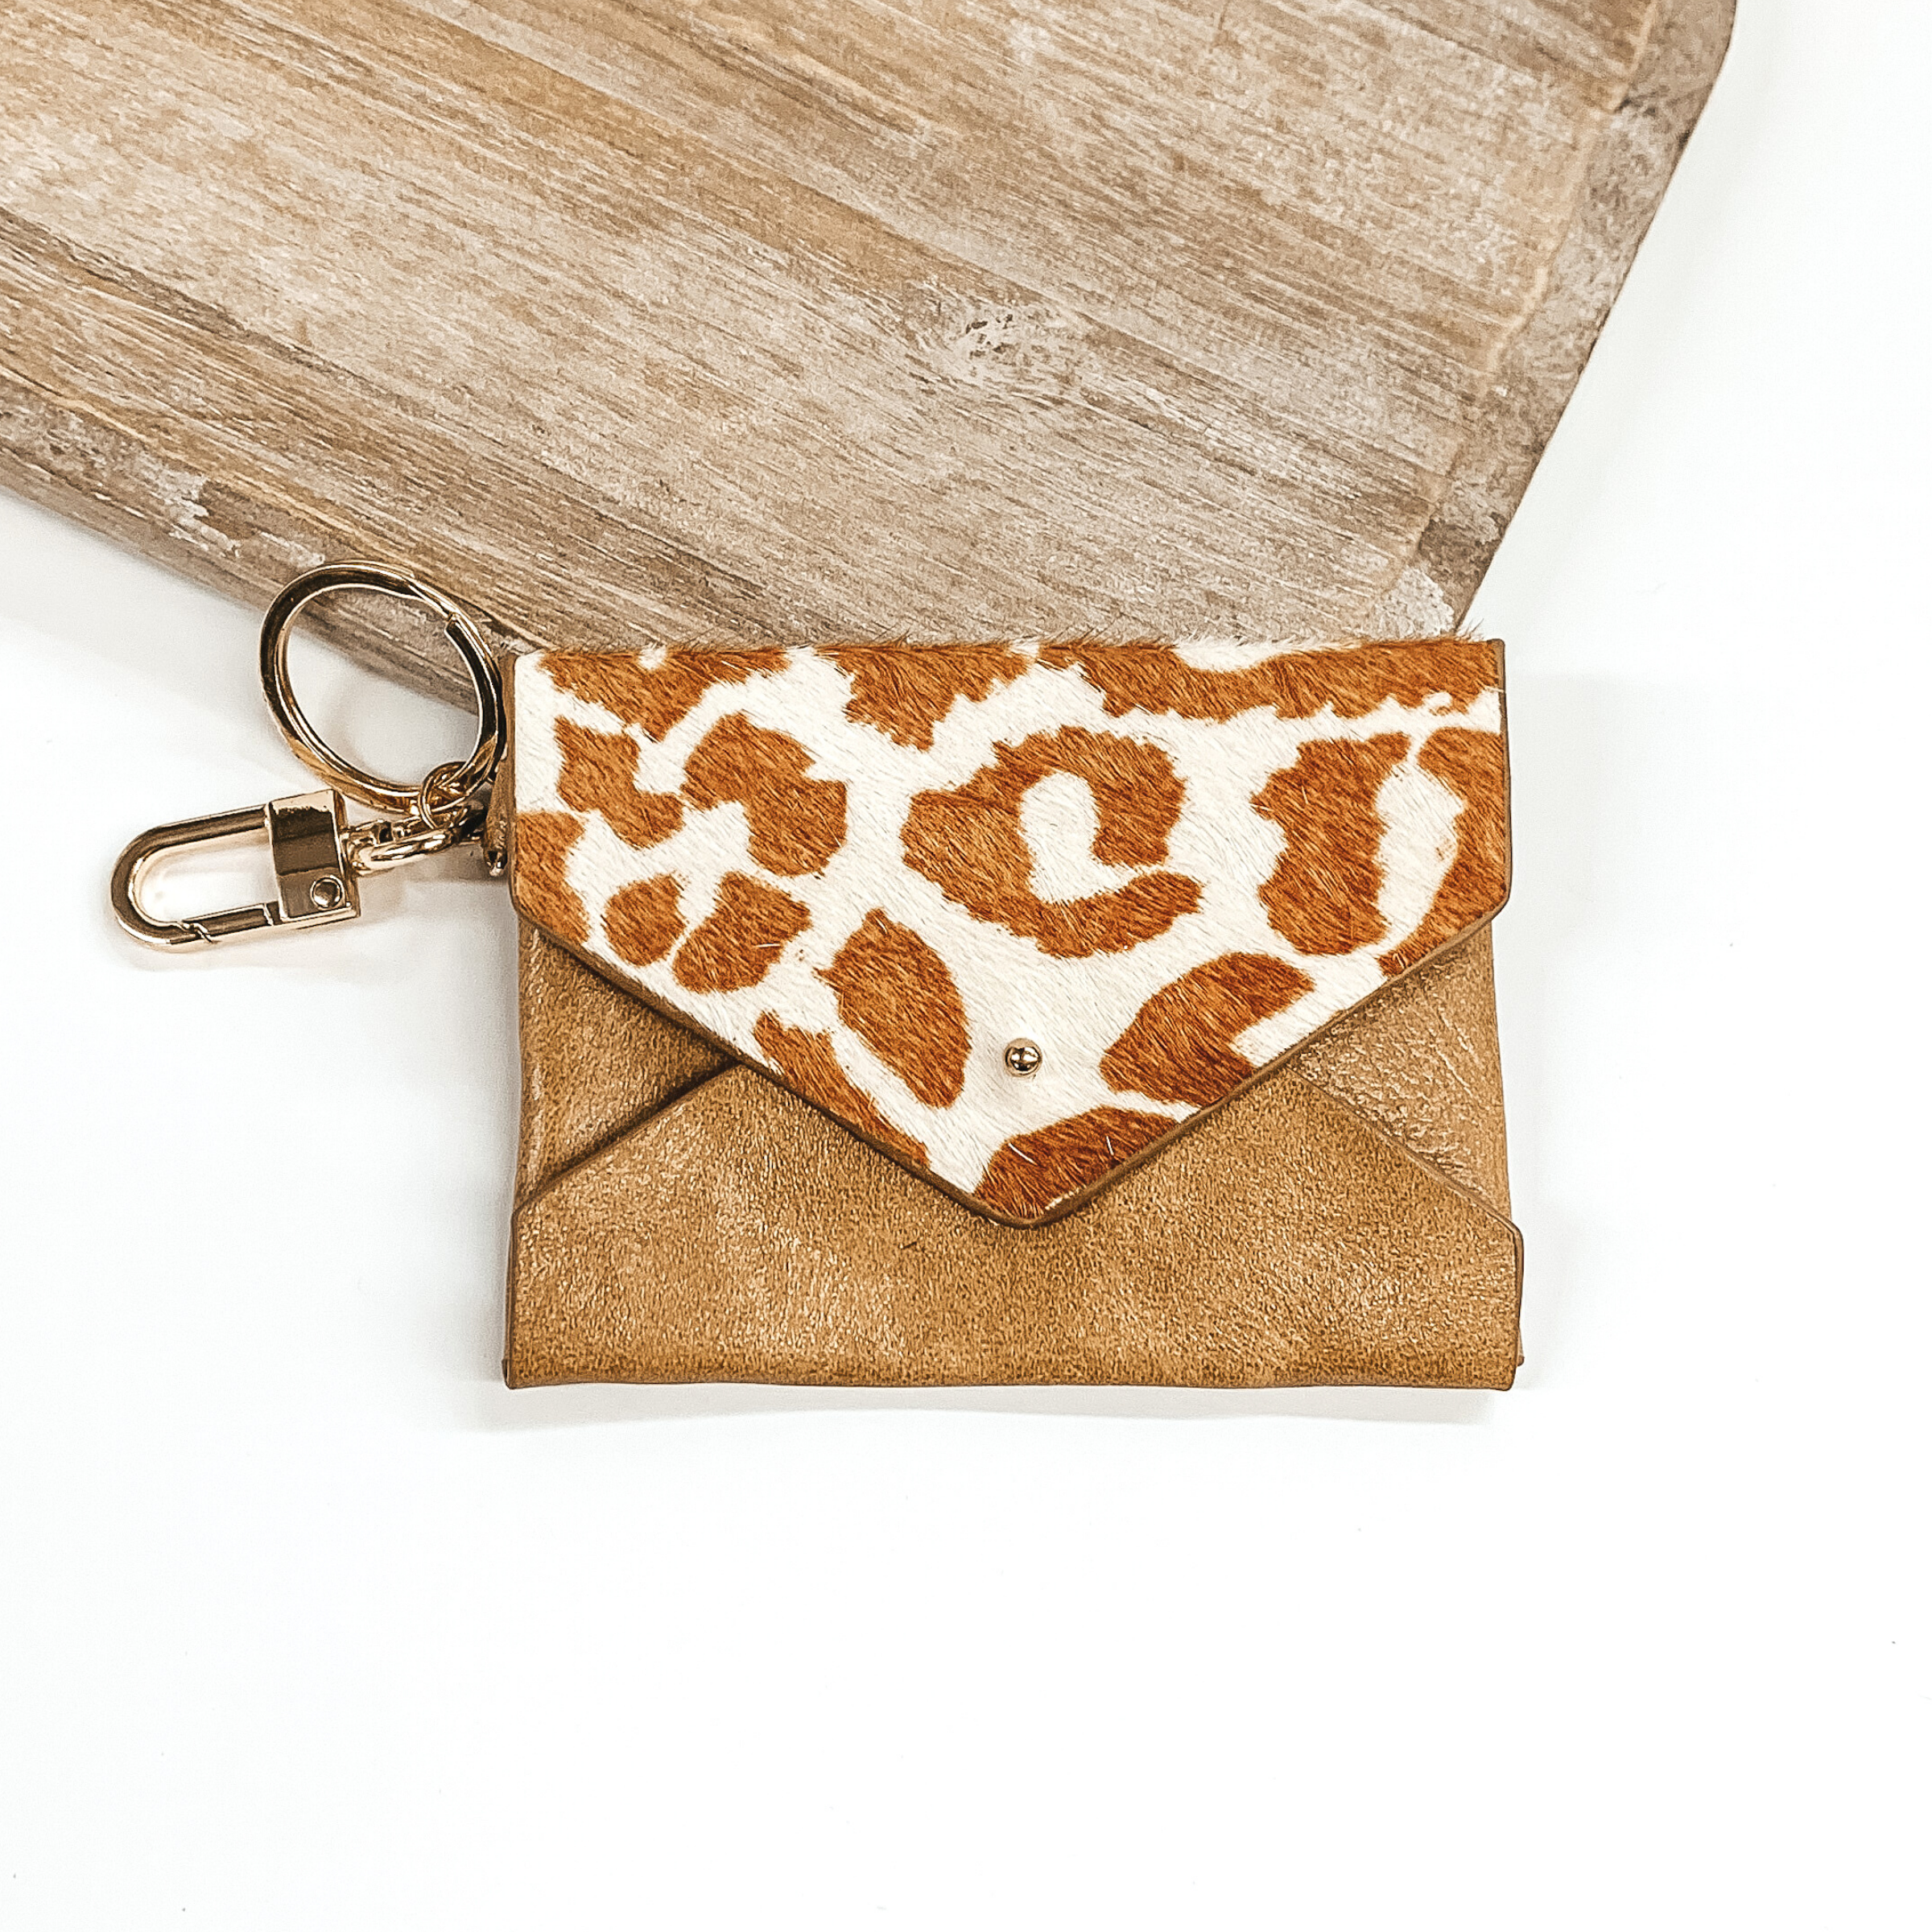 This is a tan wallet with a flap that has a white and tan leopard print. This wallet has a gold key chain. This wallet keychain is pictured laying on a light colored piece of wood on a white background. 